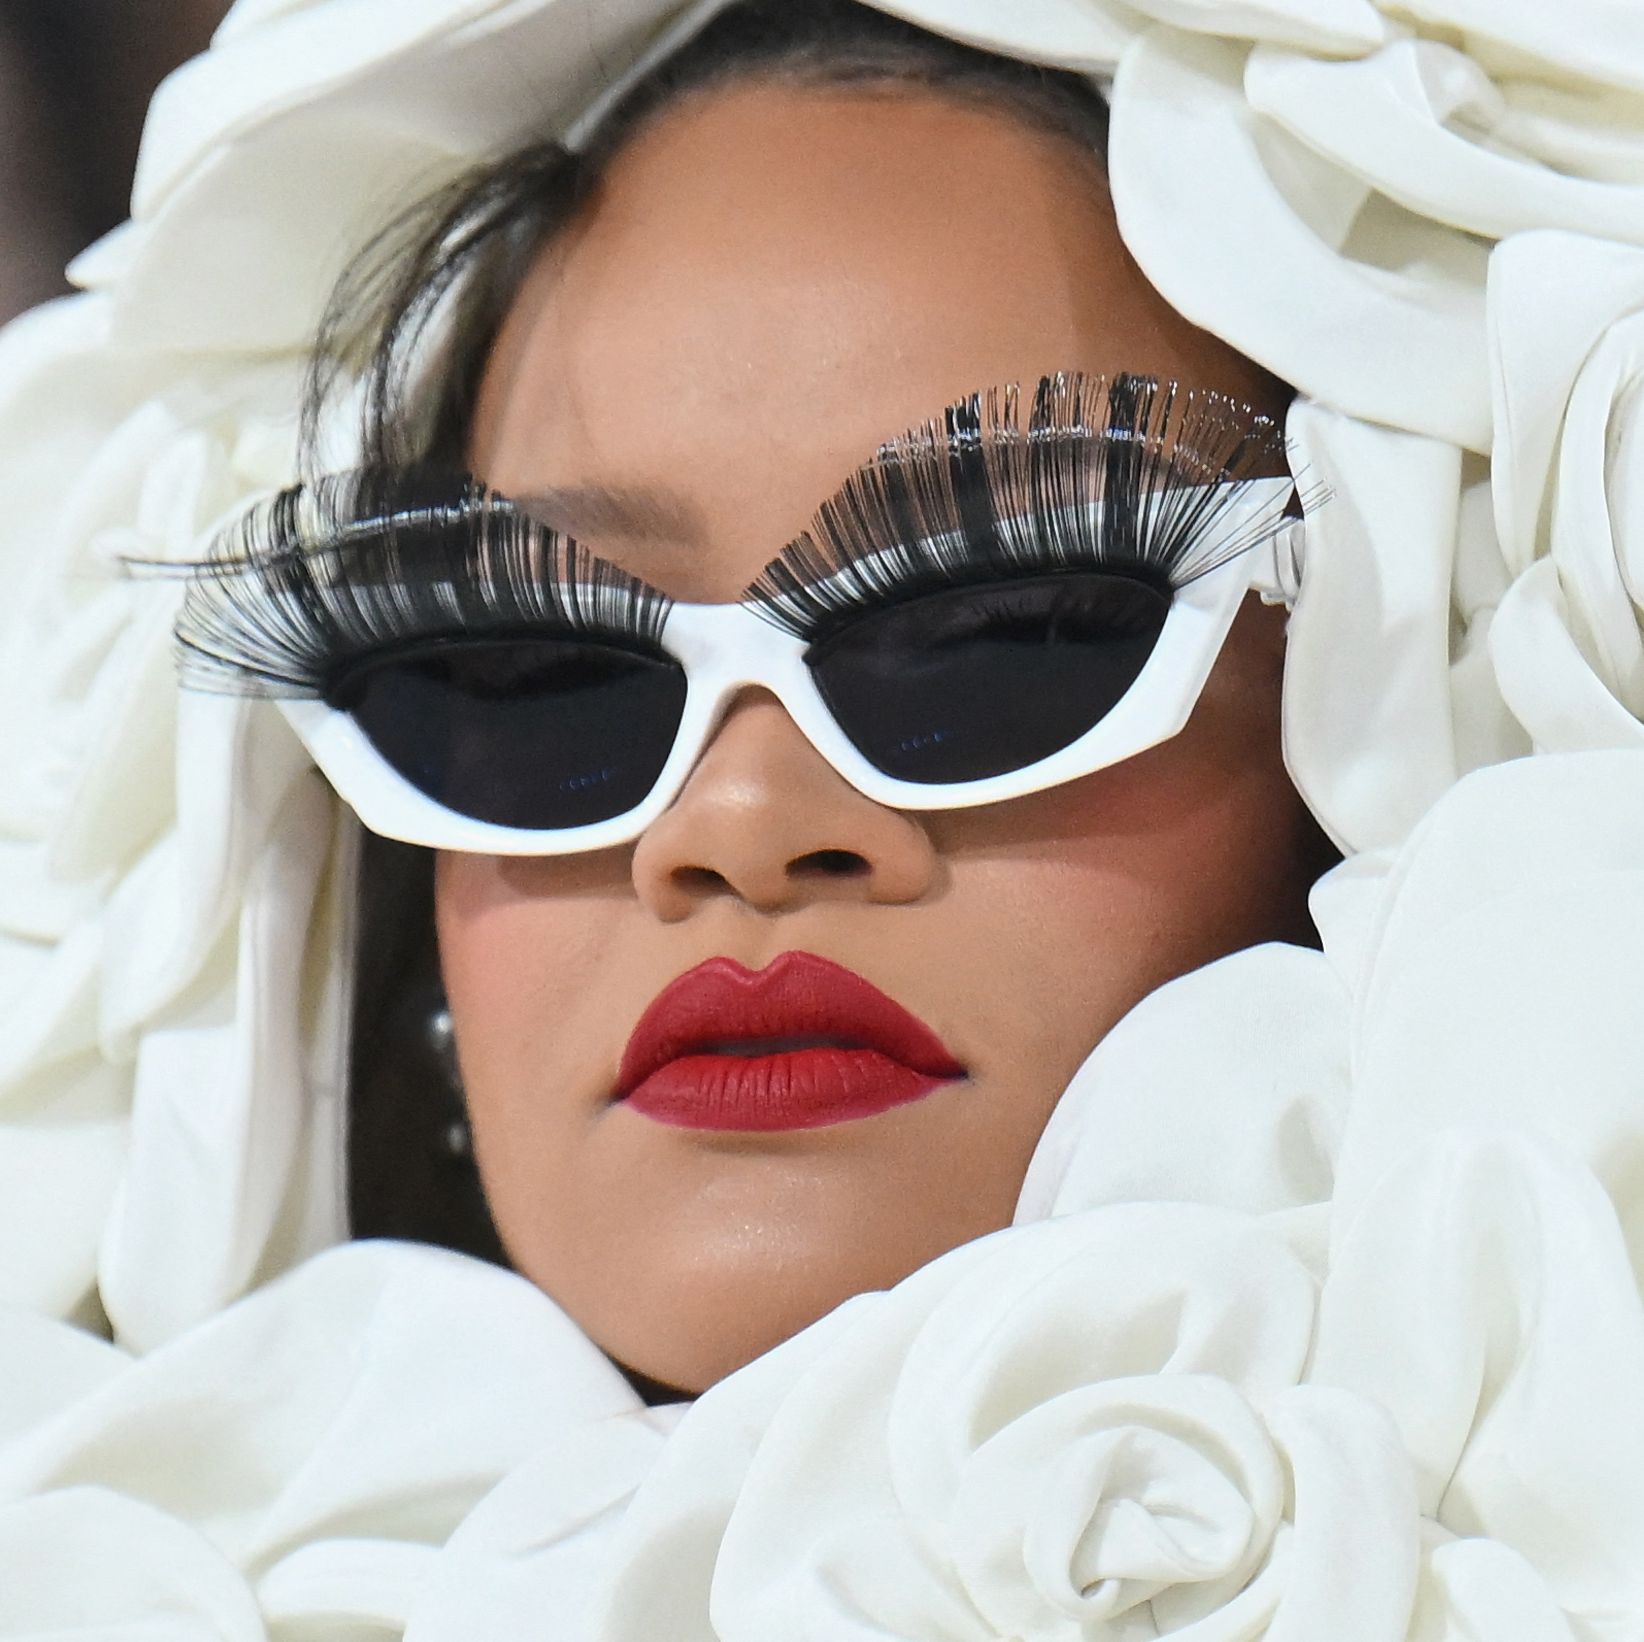 Found: The Exact Shade of Red Lipstick Rihanna Wore to the 2023 Met Gala